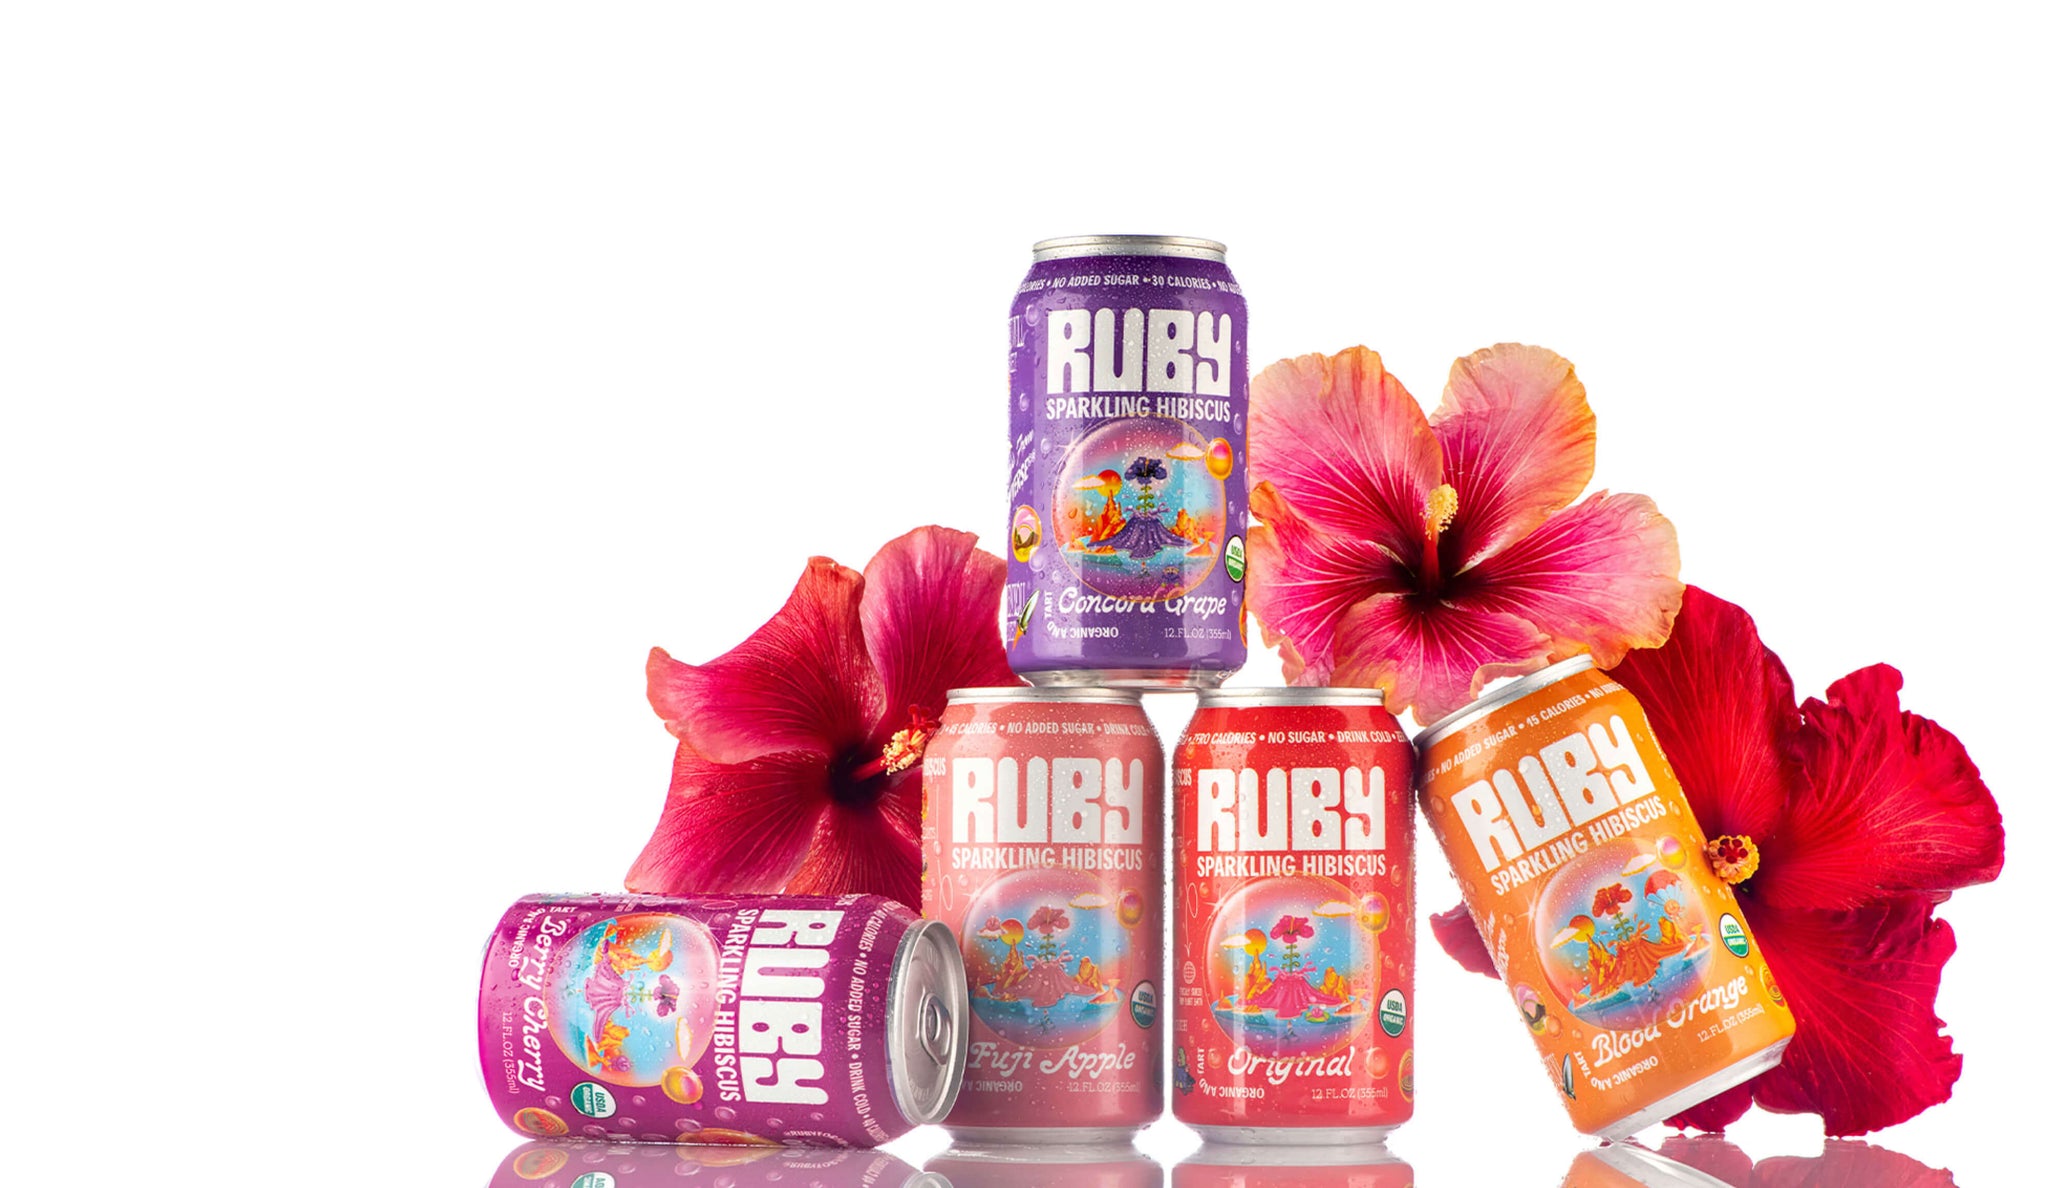 FINALLY, A JUICY ORGANIC SODA. BIG ON FLAVOR AND BIG ON BENEFITS. THAT'S THE POWER OF HIBISCUS.